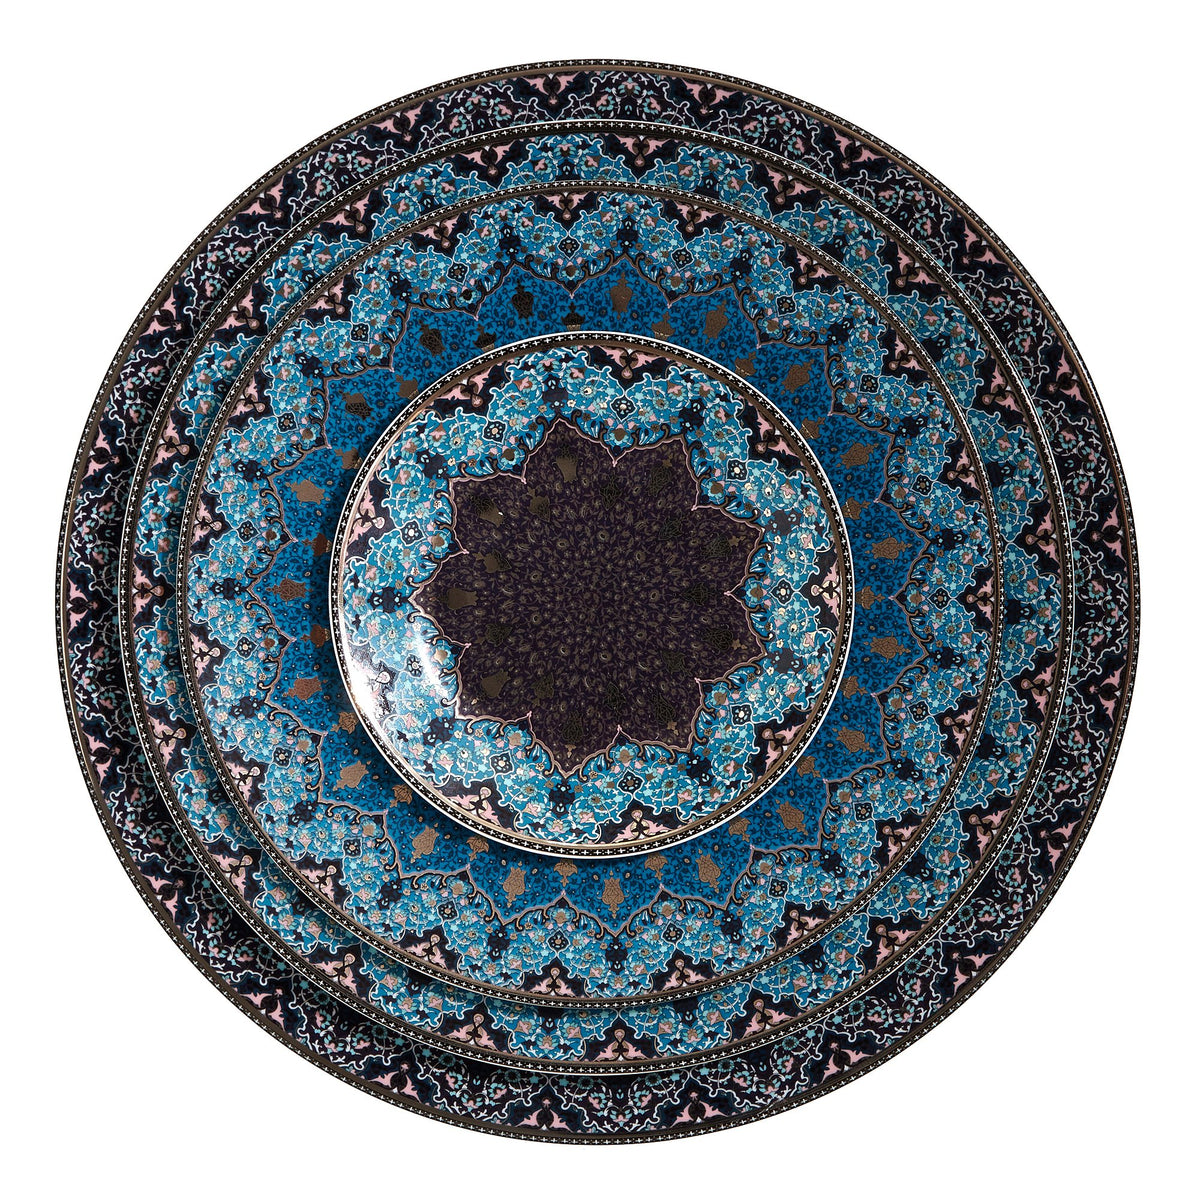 Dhara Peacock Charger Plate